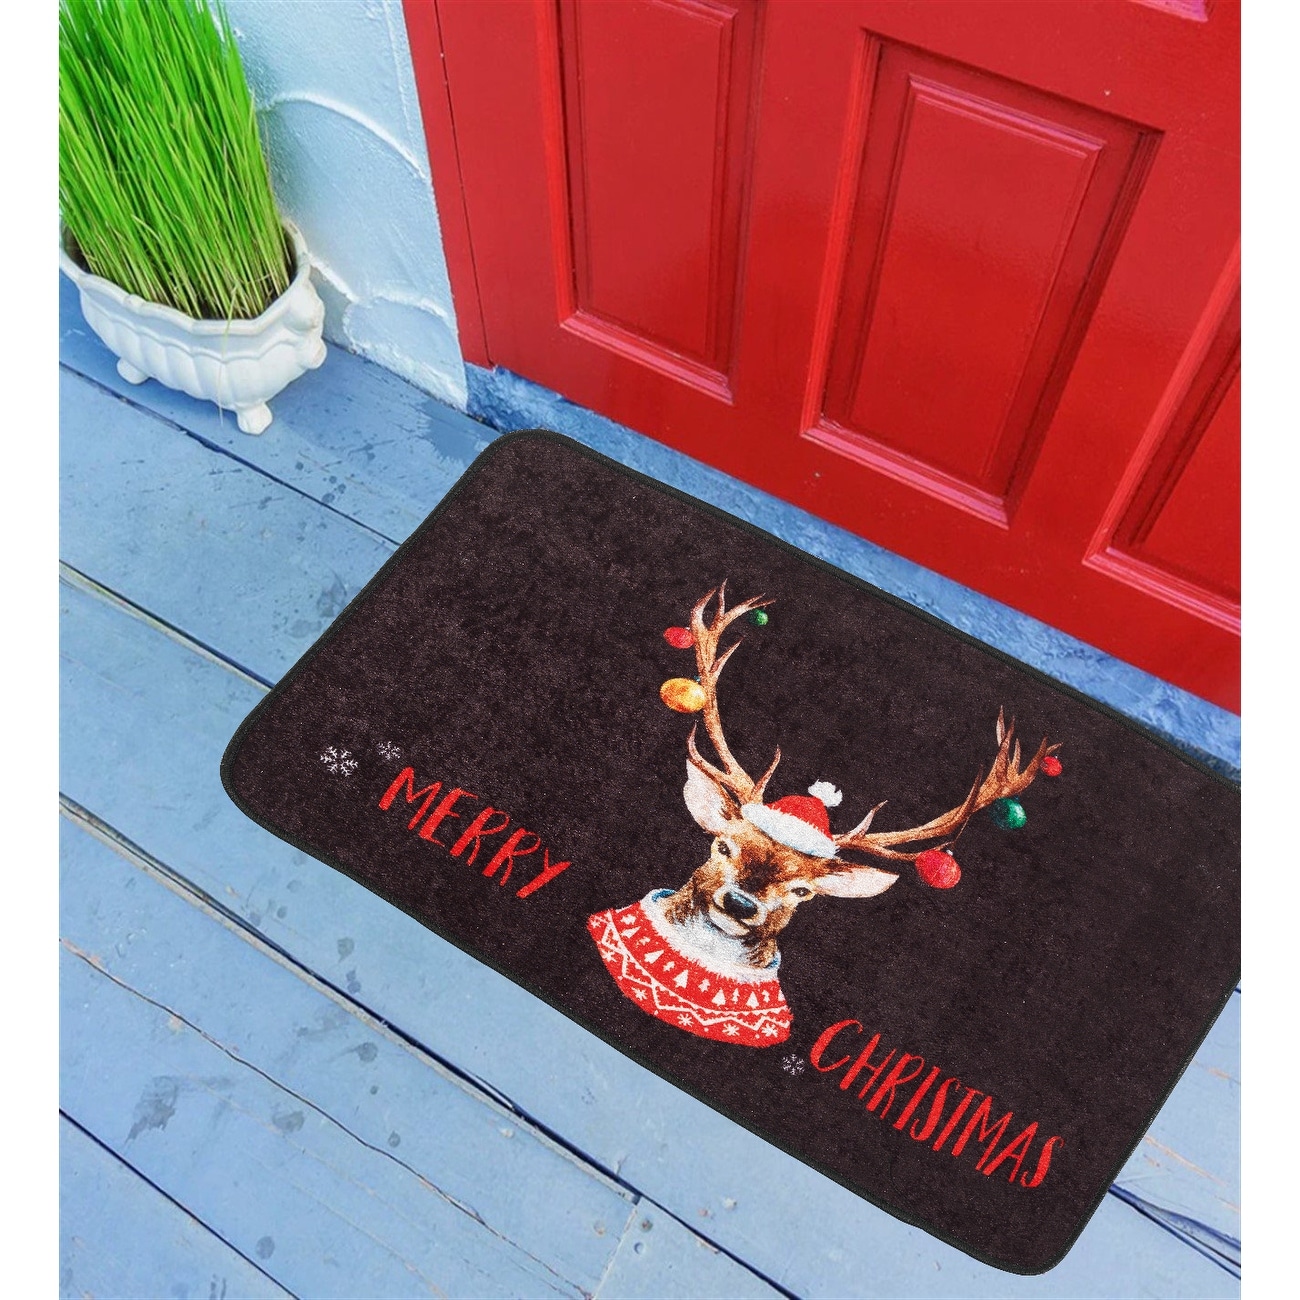 https://ak1.ostkcdn.com/images/products/is/images/direct/a7ffcdc21d3e8683276e5ab19c5ee2a2345d2356/Ayviana-Non-Slip-Outdoor-Christmas-Mat.jpg